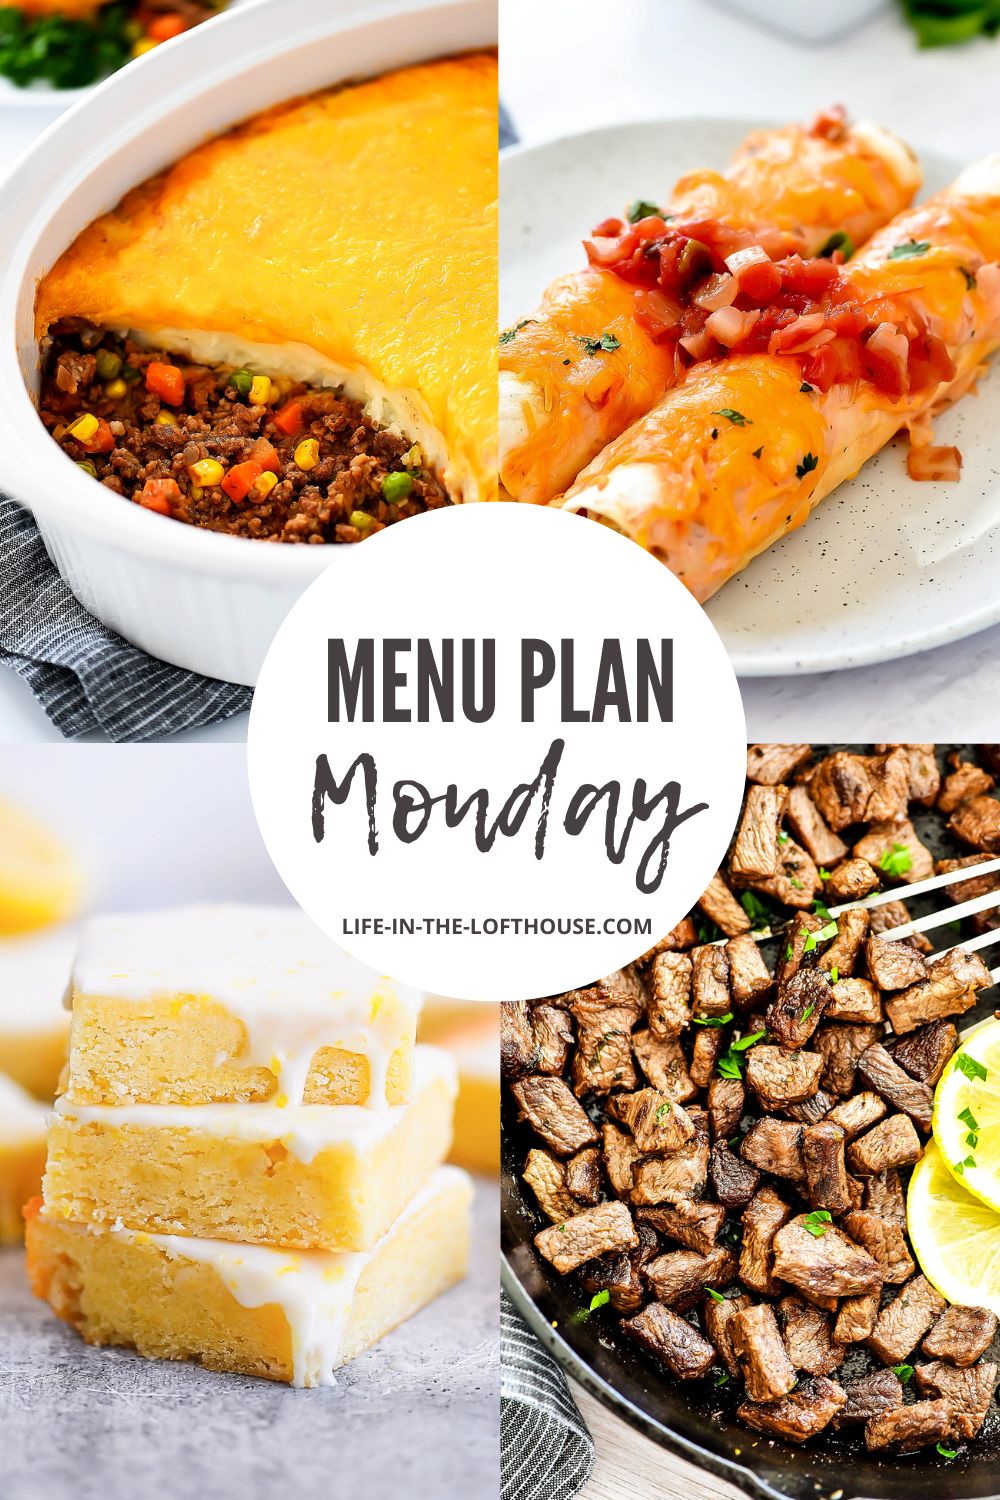 Menu Plan Monday is a list of recipe ideas for the week.